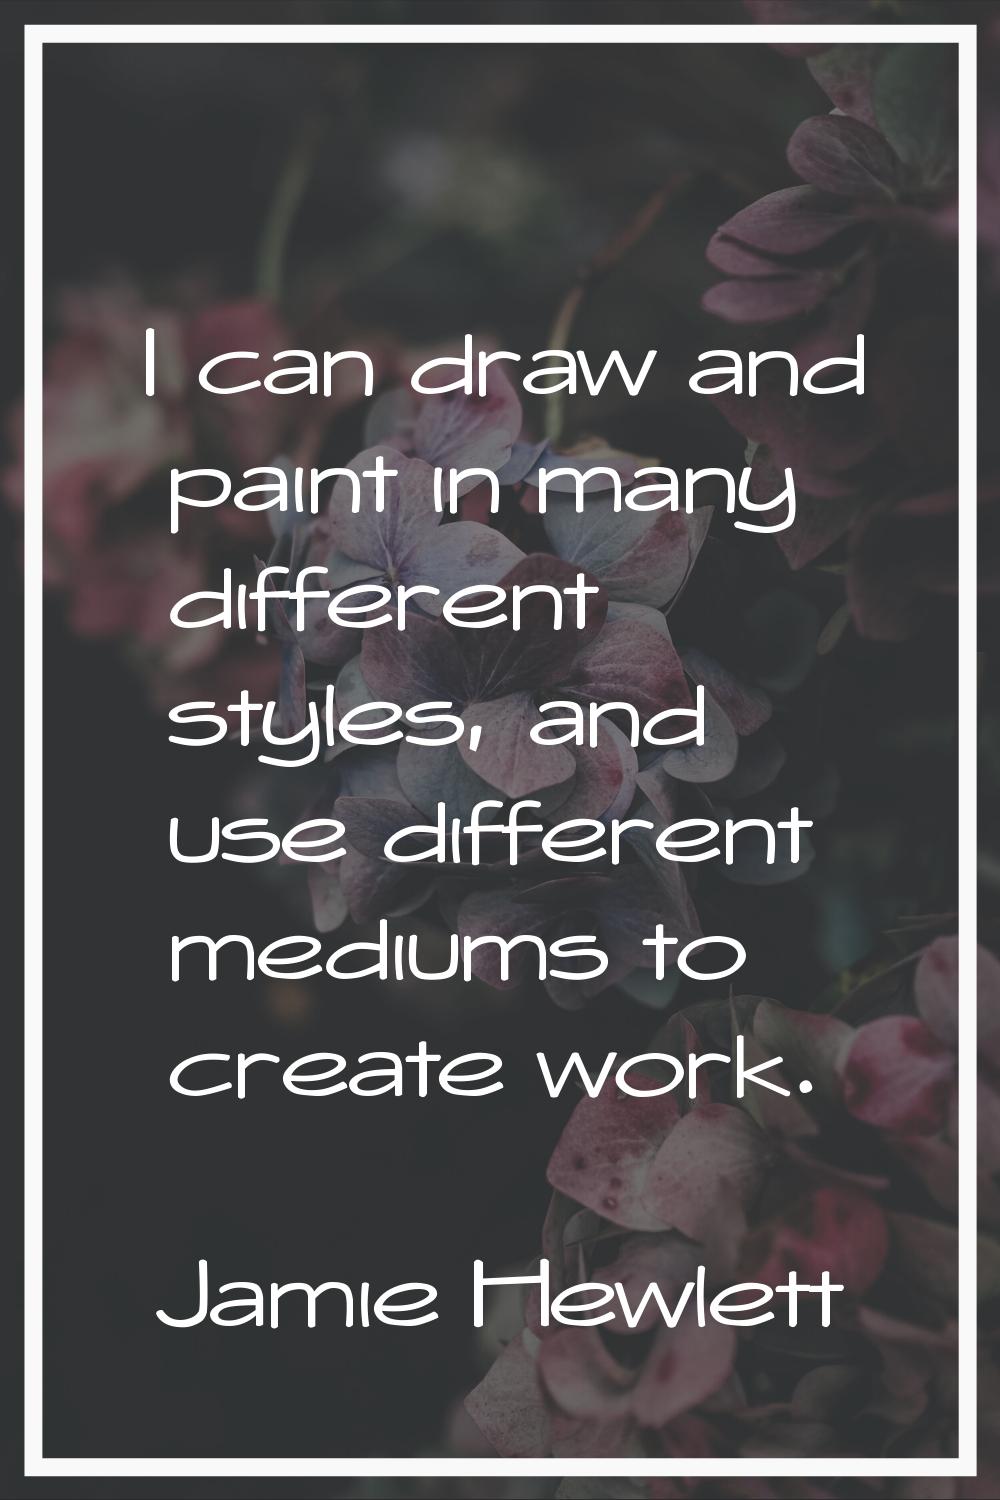 I can draw and paint in many different styles, and use different mediums to create work.